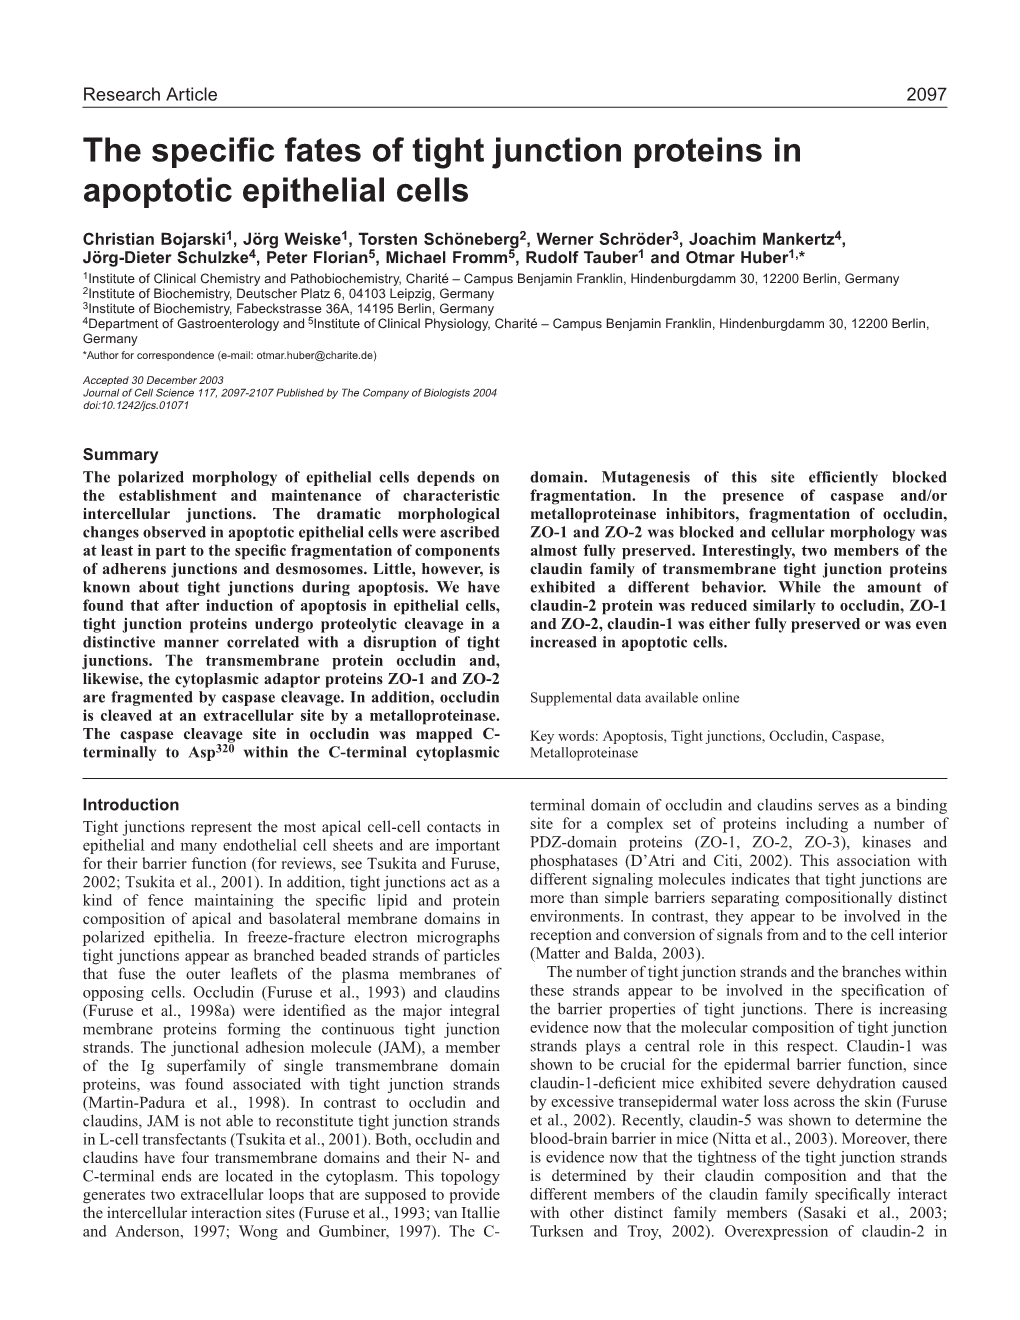 The Specific Fates of Tight Junction Proteins in Apoptotic Epithelial Cells